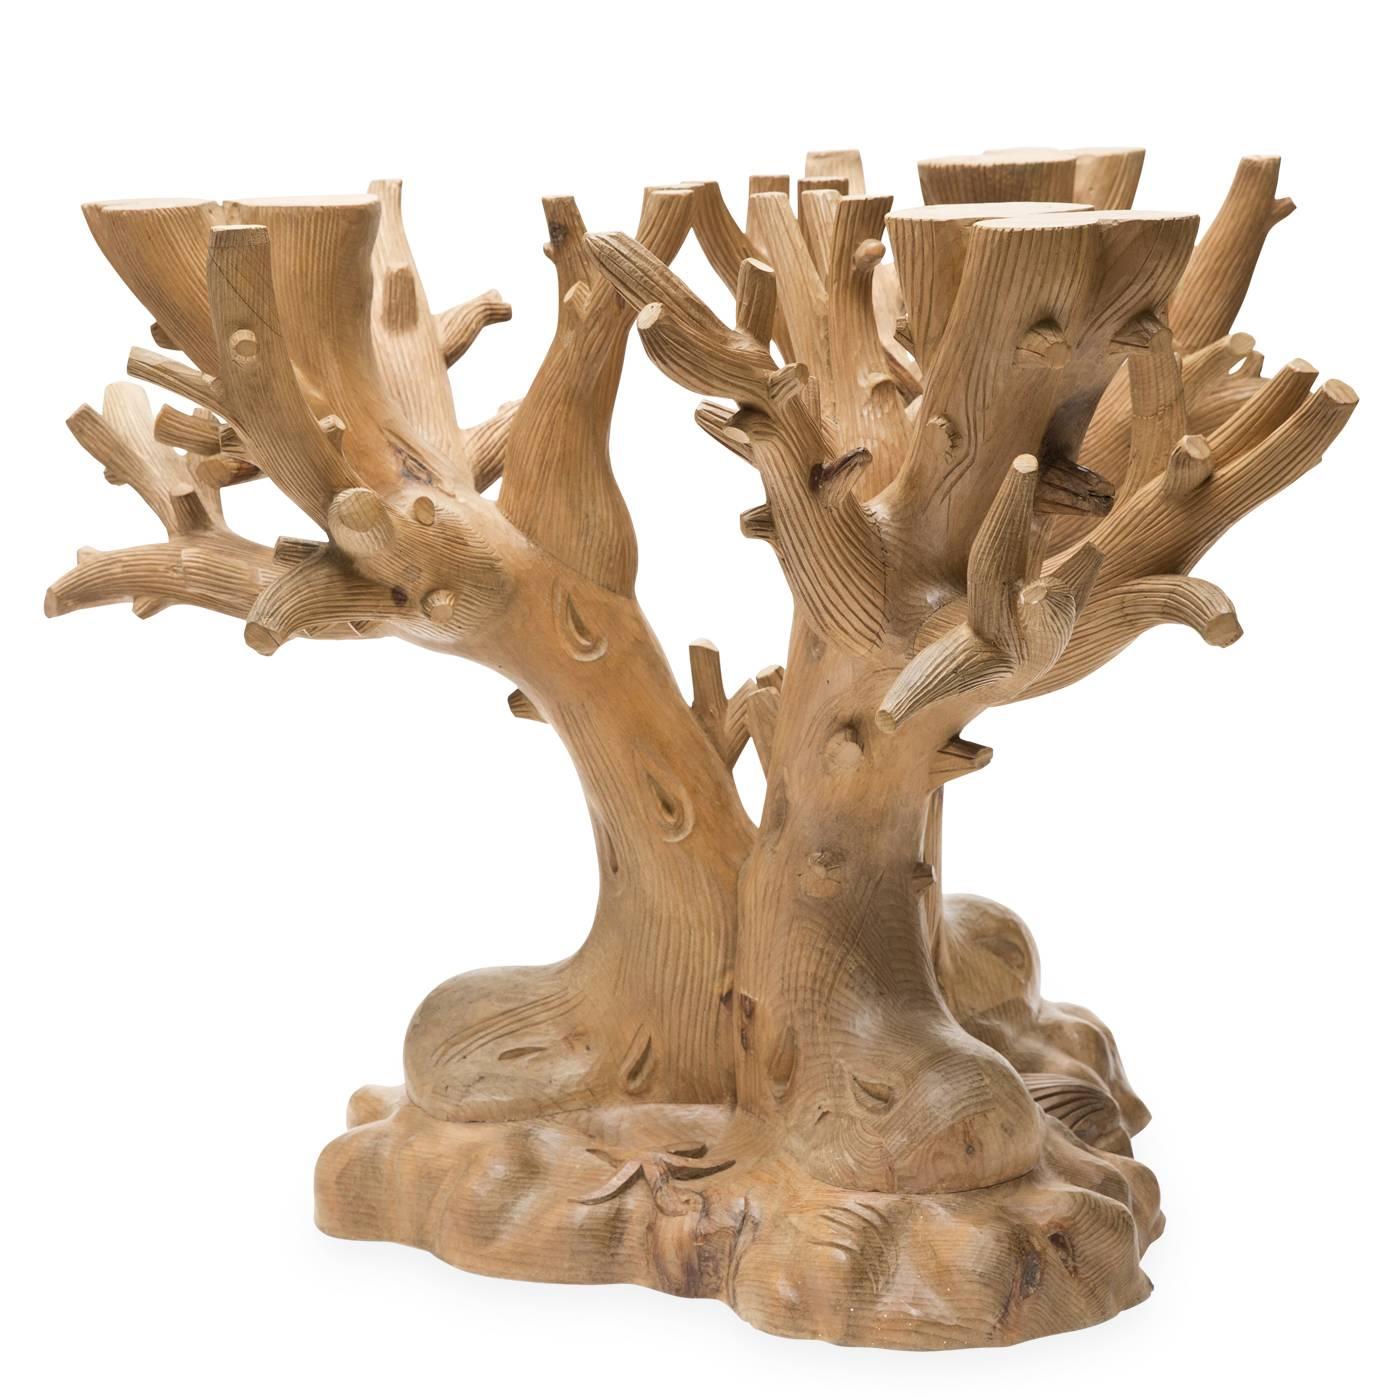 Decorative table base by Bartolozzi e Maioli in Austrian pine with a wax finish. The handcrafted oak tree form is adorned with finely sculpted leaves and birds. Originally presented at the 1980 Salone del Mobile in Milan.